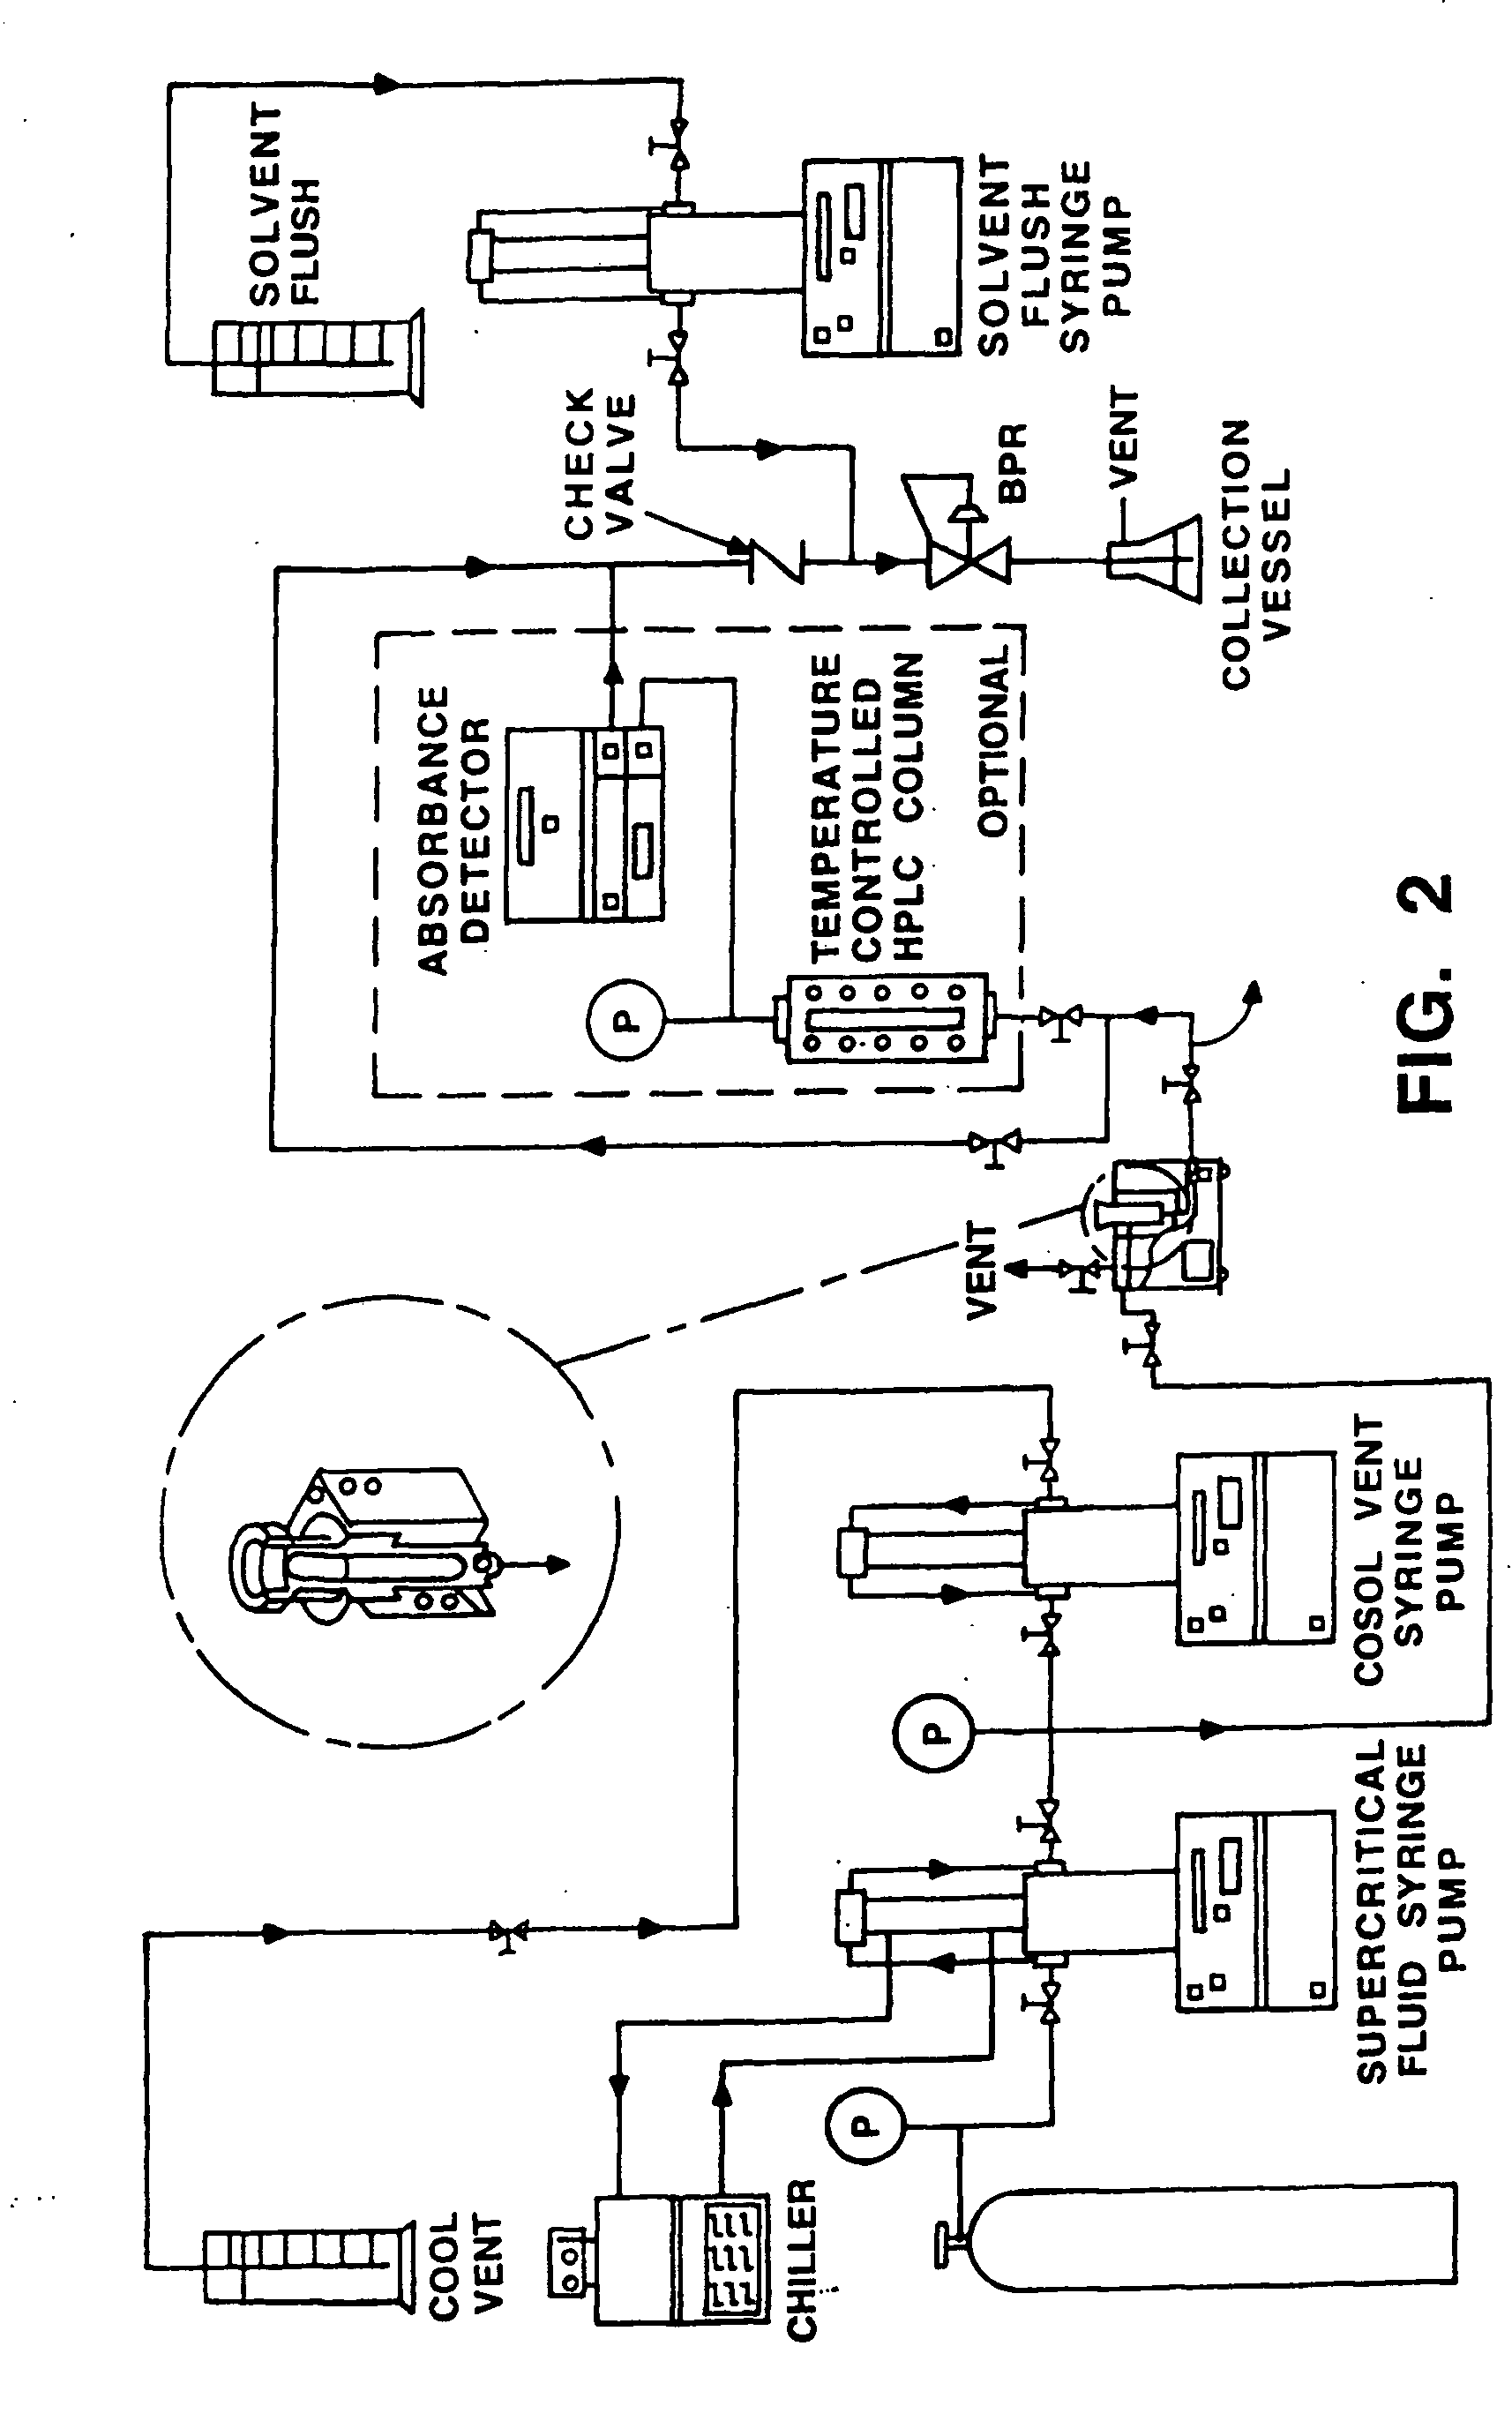 COMPOSITIONS AND METHODS FOR INHIBITING 5-a REDUCTASE